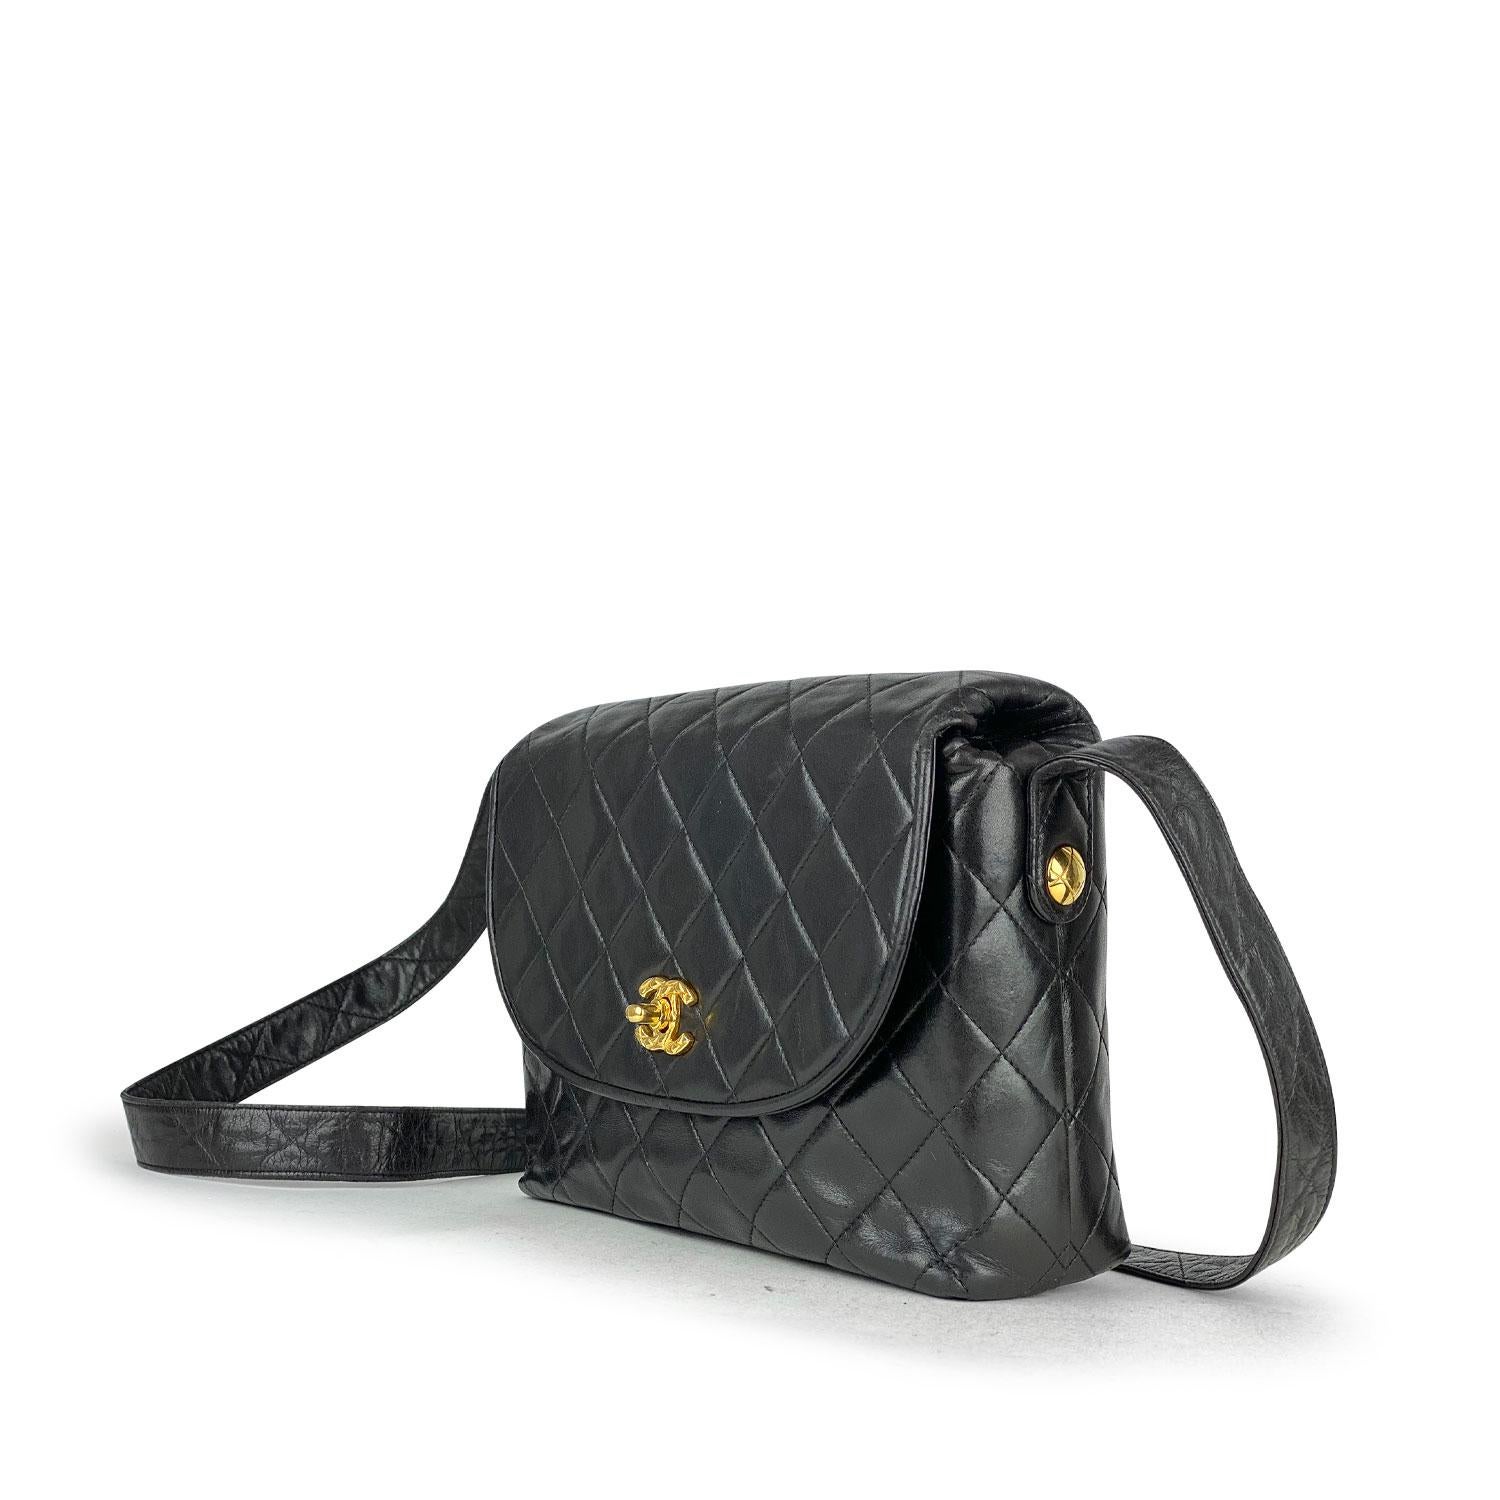 Black quilted Lamb leather Chanel crossbody bag with

– Gold-tone hardware
– Flat leather shoulder strap
– Slip pocket at exterior back
– Tonal leather lining, dual pockets at interior wall; one with zip closure and interlocking CC turn-lock closure